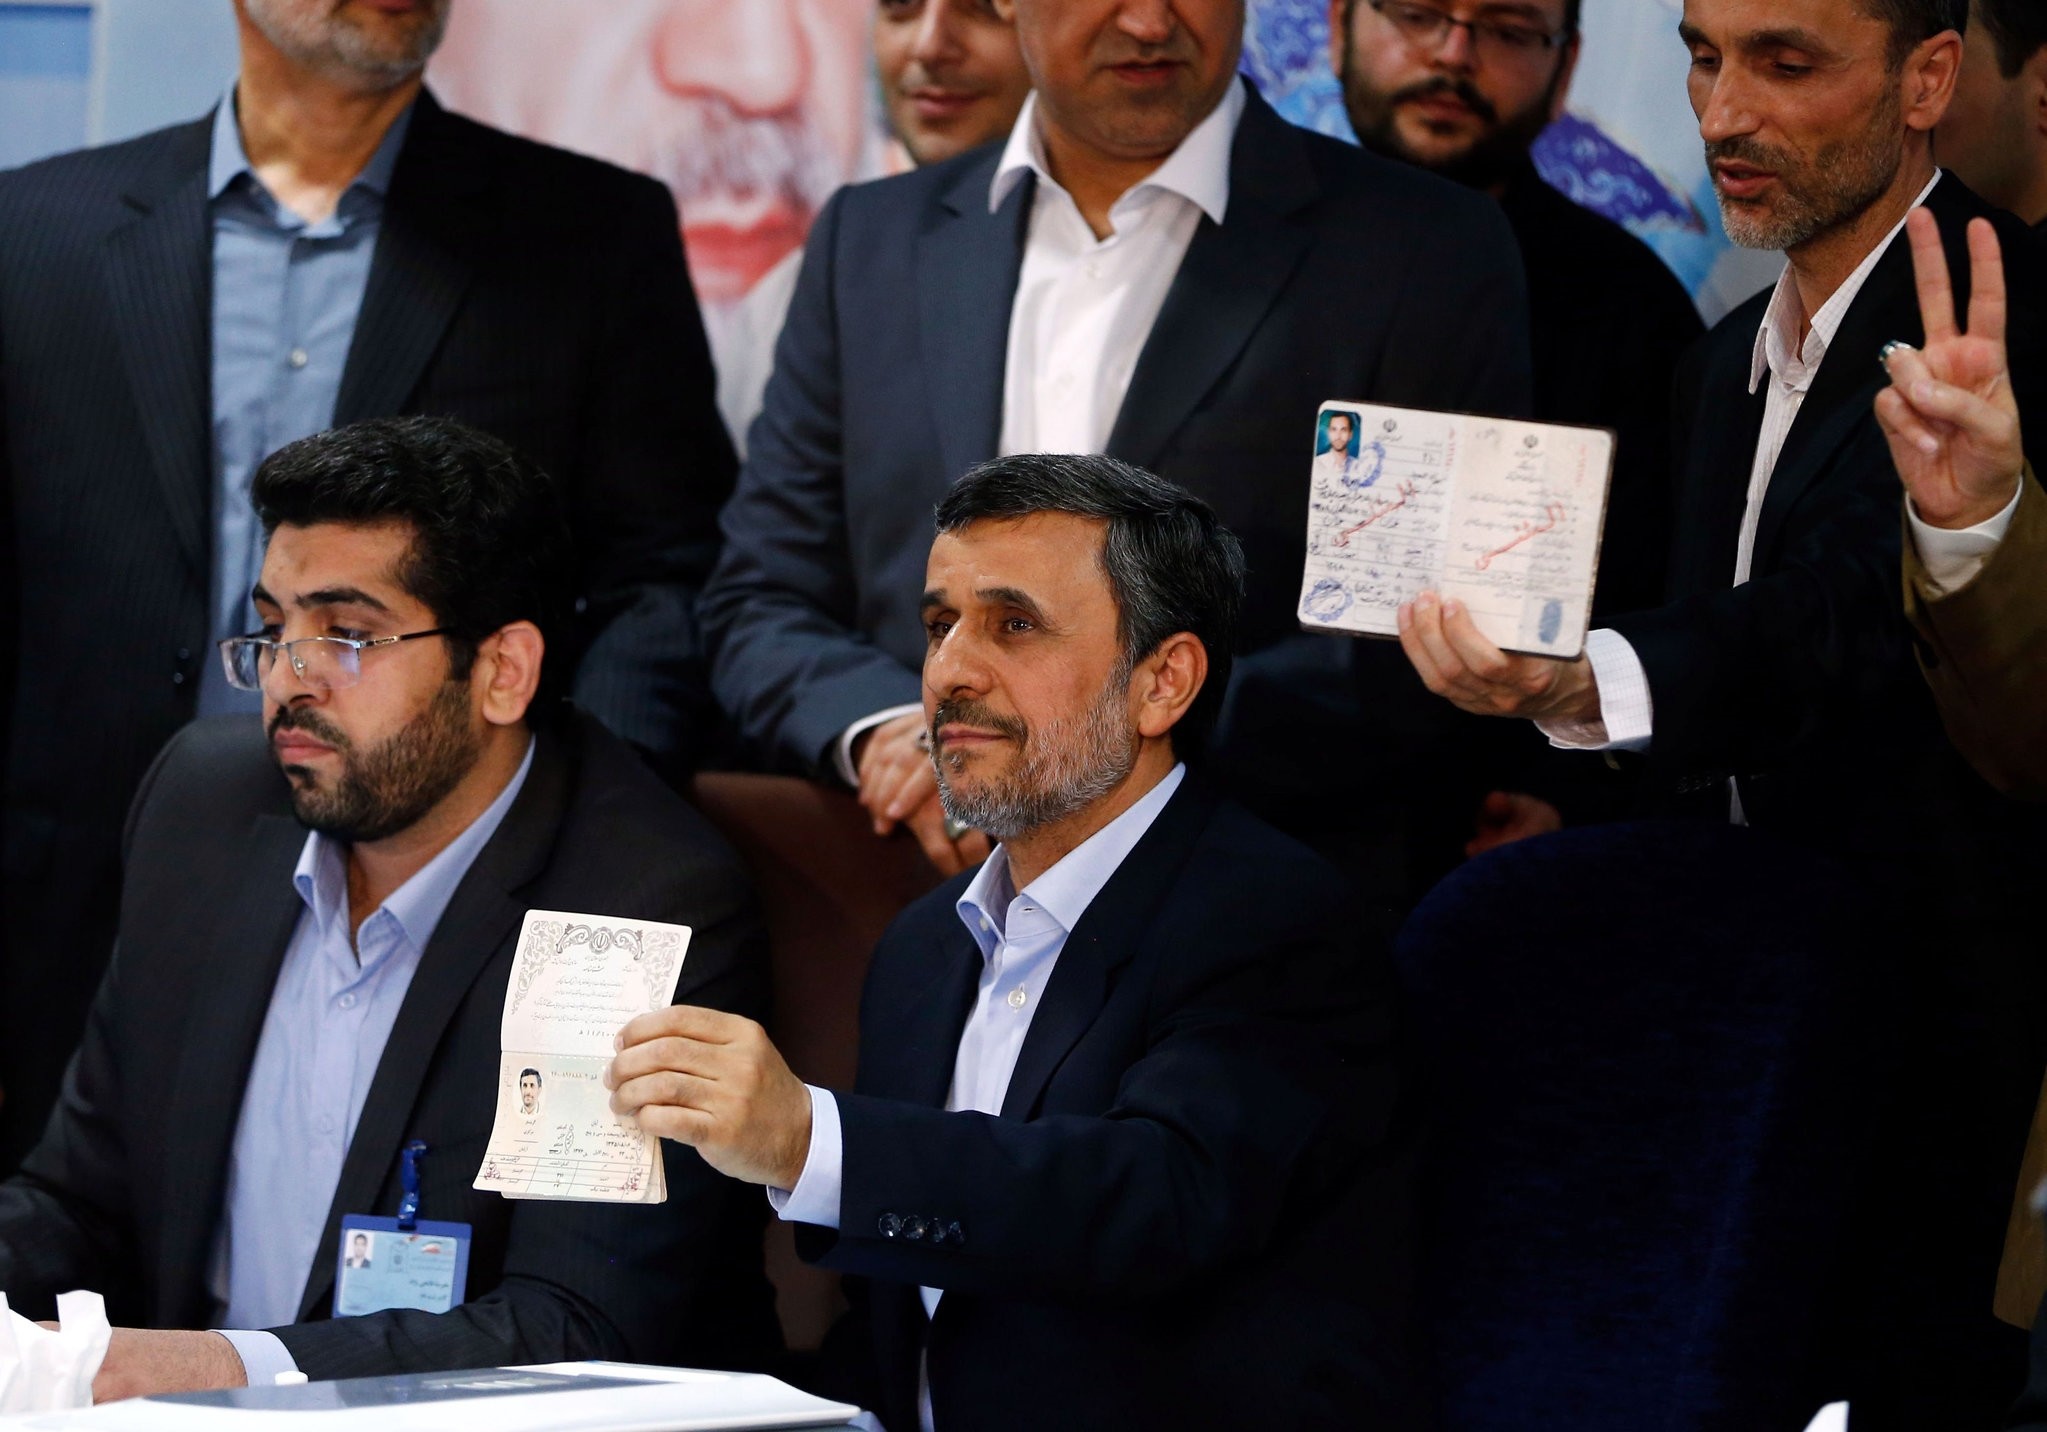 Former Iranian president Mahmoud Ahmadinejad (C) displays identification at the Interior Ministry's election headquarters as candidates begin to sign up for the upcoming presidential elections in Tehran on April 12, 2017. (AFP Photo)